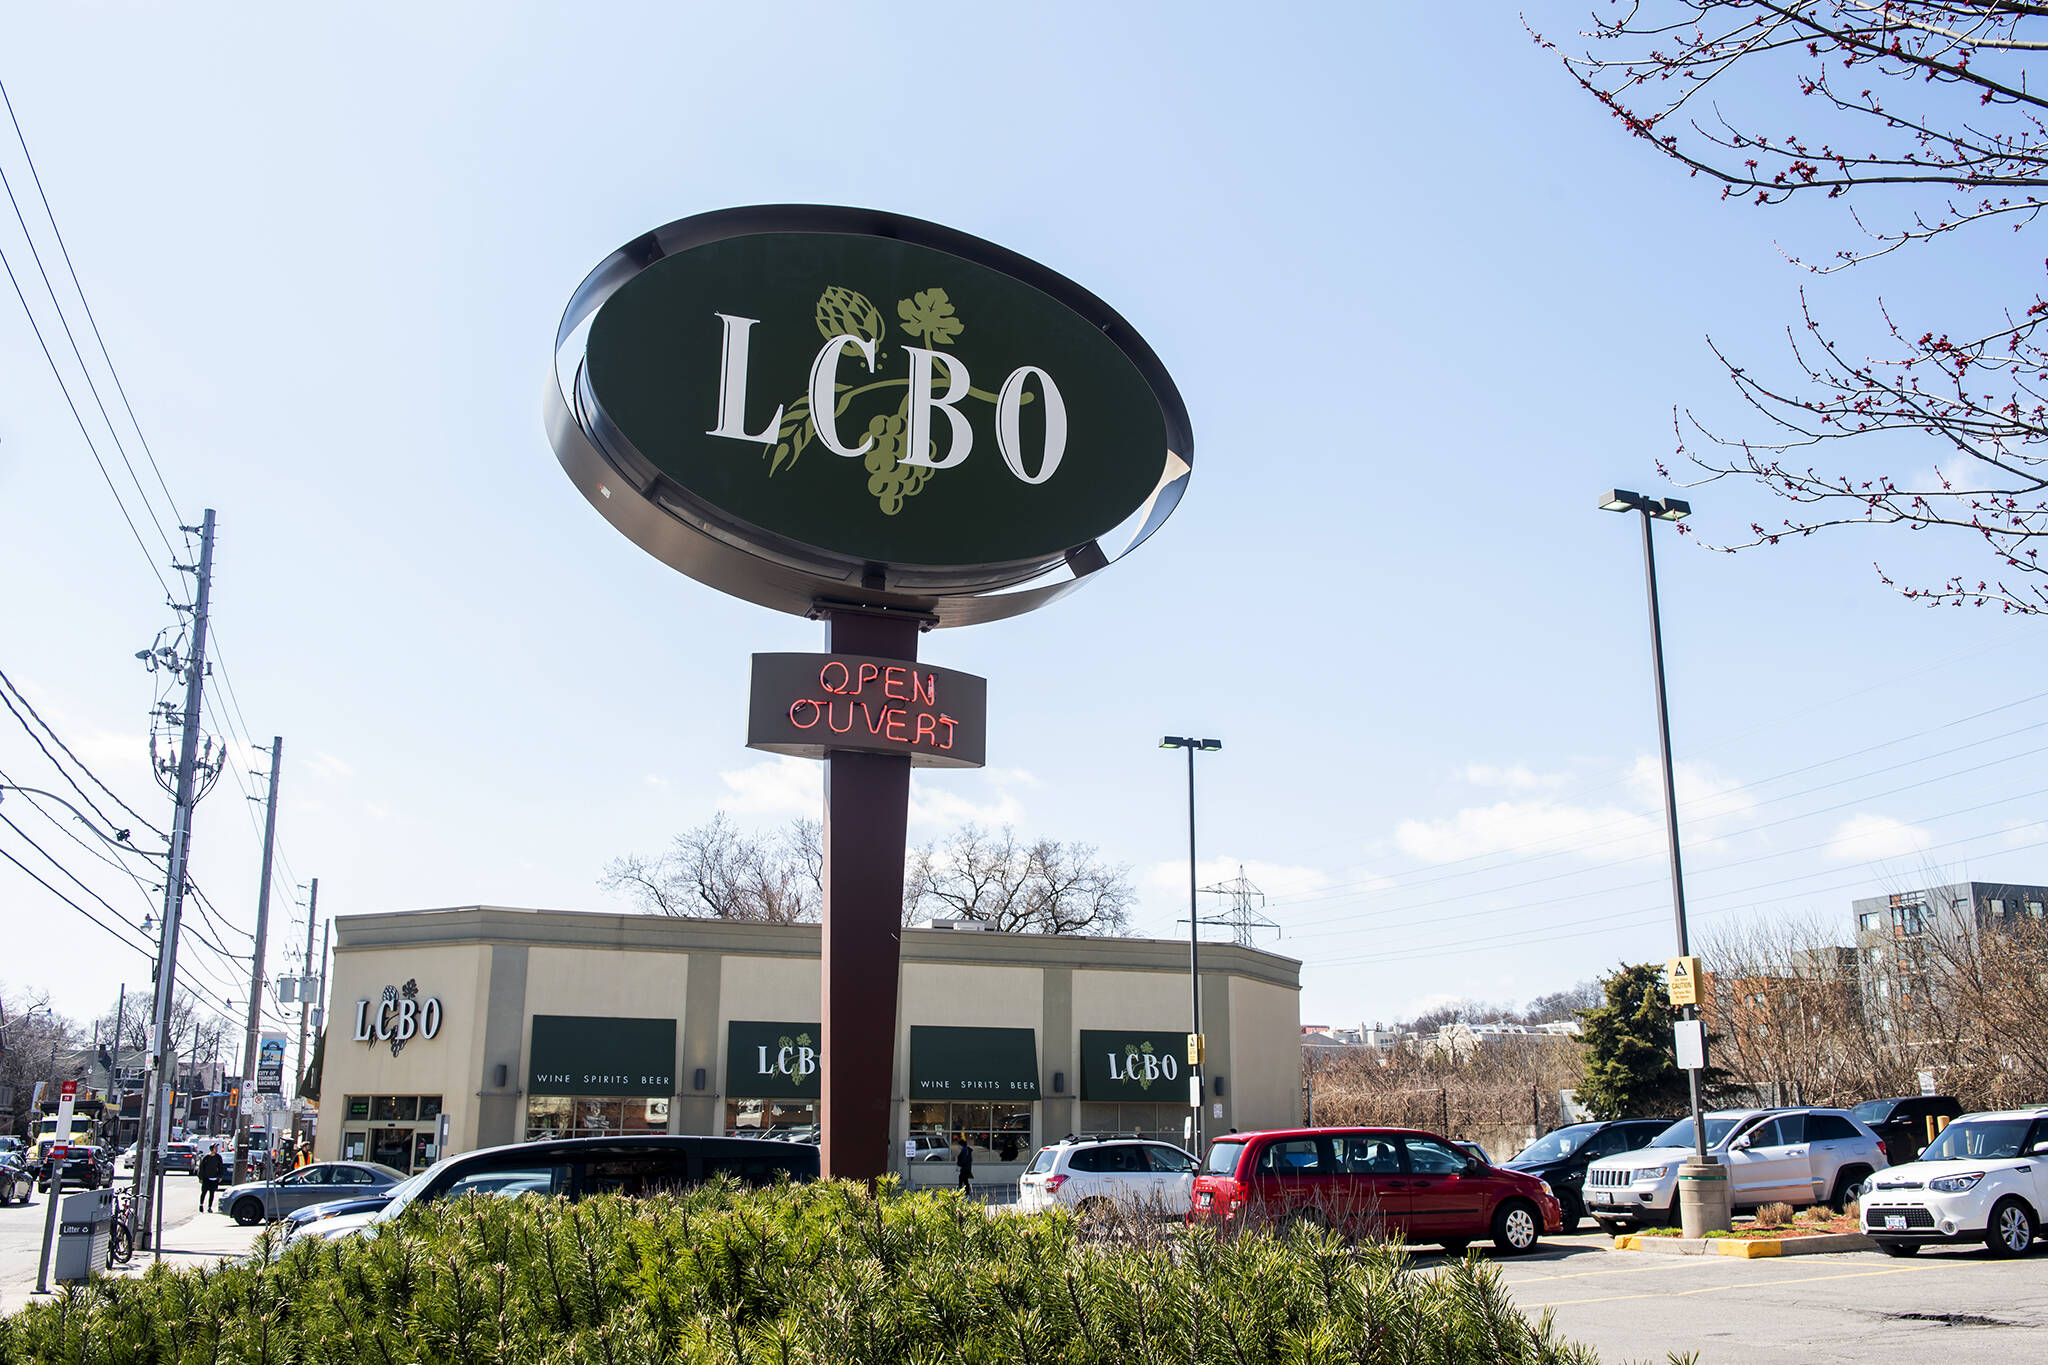 LCBO Victoria Day hours